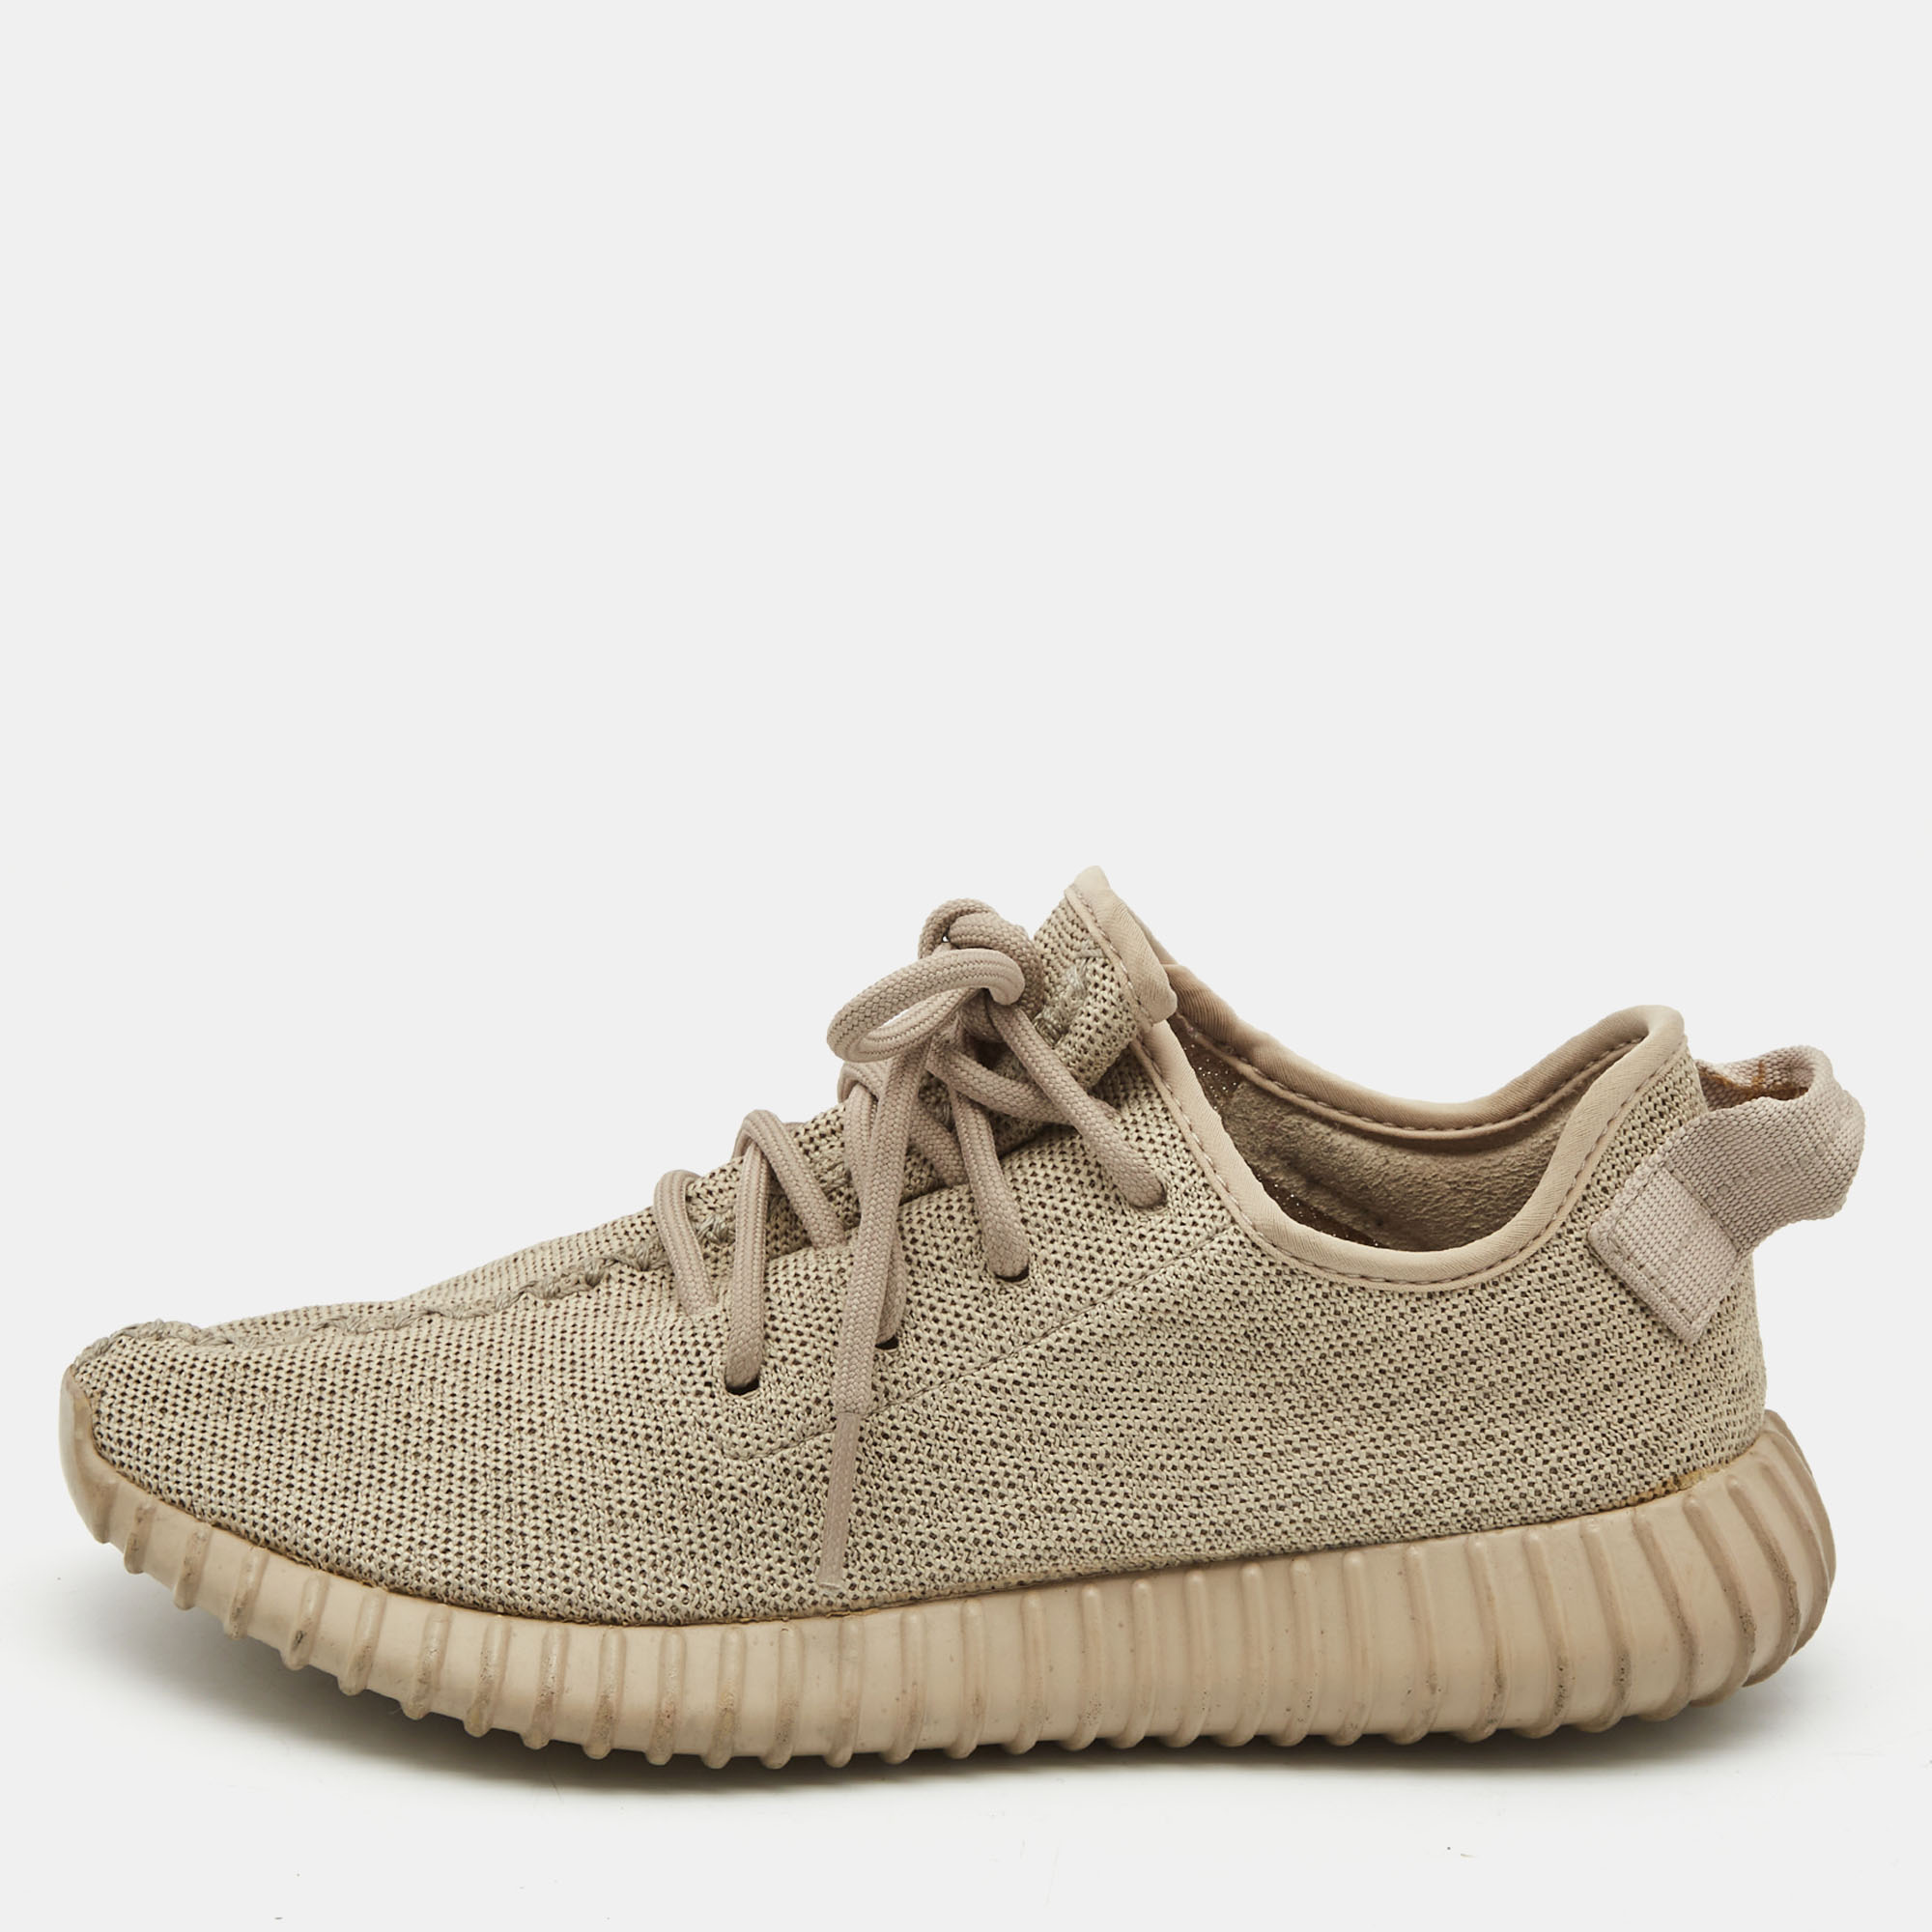 The Yeezy x Adidas collaboration is one of the most celebrated collaborations. Exuding a sporty vibe this pair of Boost 350 V2 sneakers feature a knit fabric design lace ups on the vamps and chunky midsoles. The beige sneakers offer great cushioning and are complete with tough rubber soles.